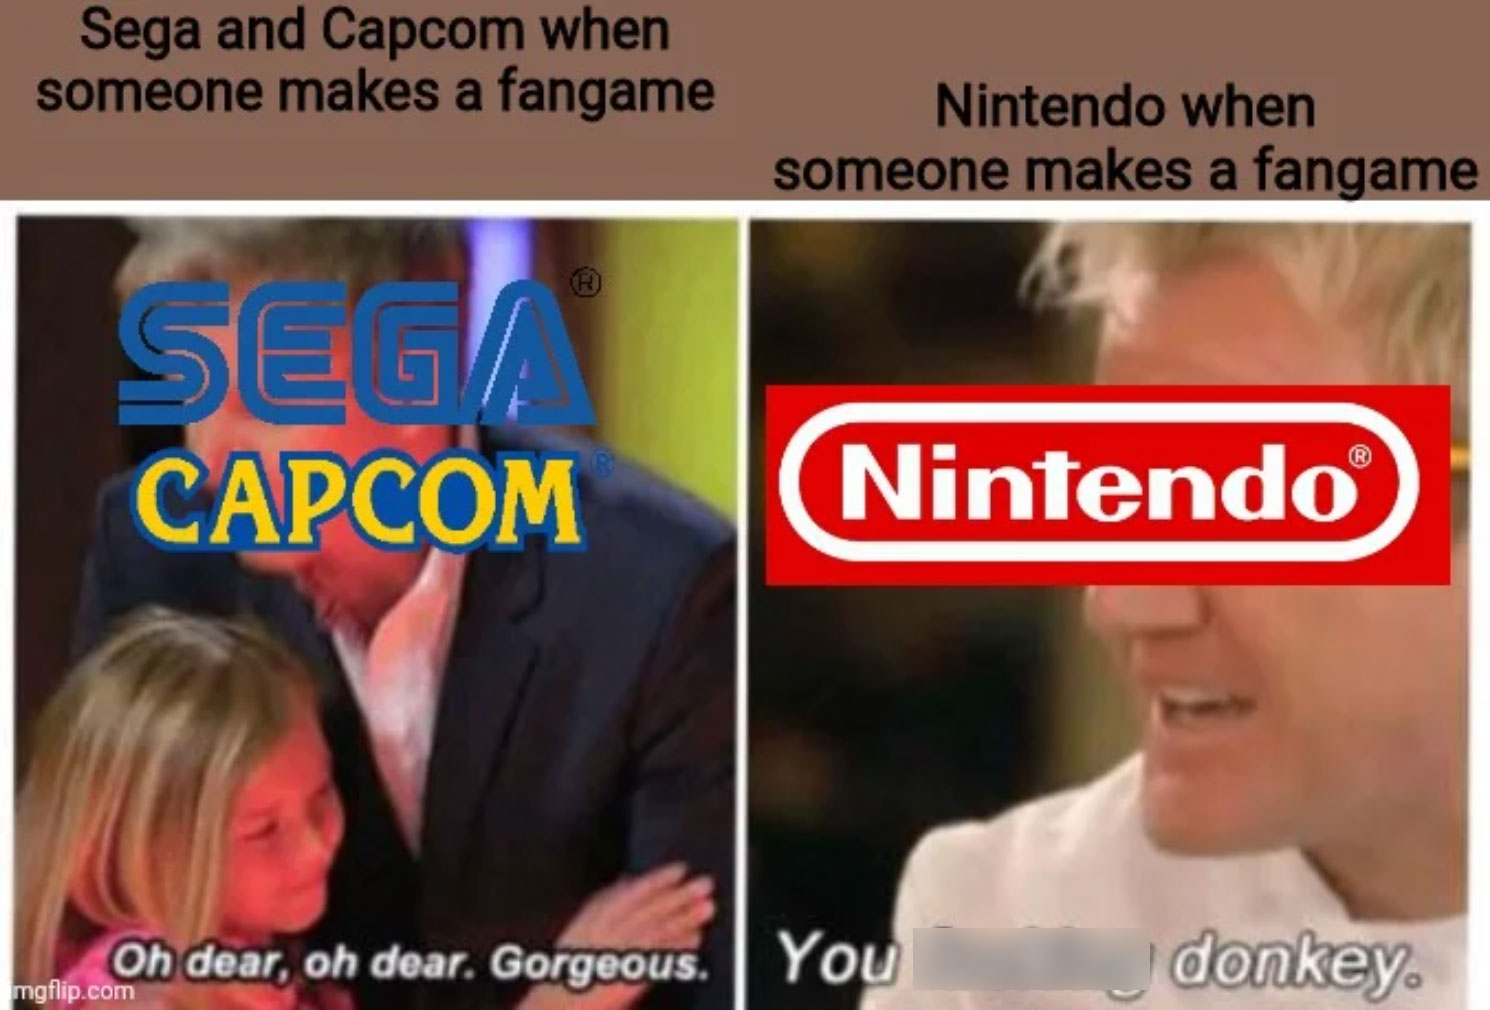 funny gaming memes - 3ds ar cards - Sega and Capcom when someone makes a fangame Nintendo when someone makes a fangame Seg Capcom Nintendo Oh dear, oh dear. Gorgeous. You donkey mgflip.com